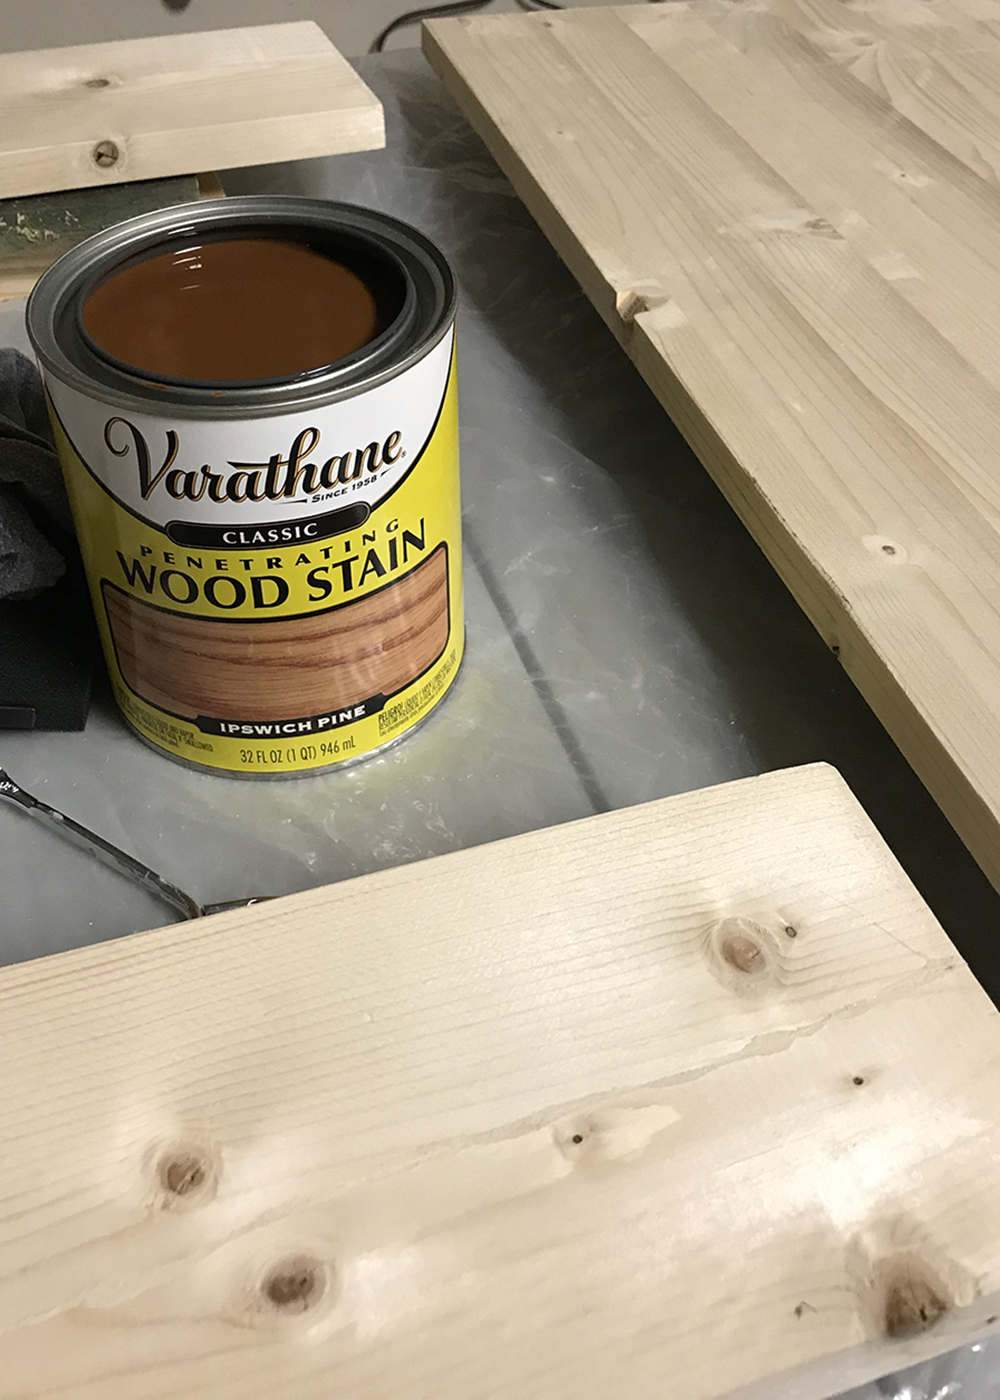 Staining the wood shelves